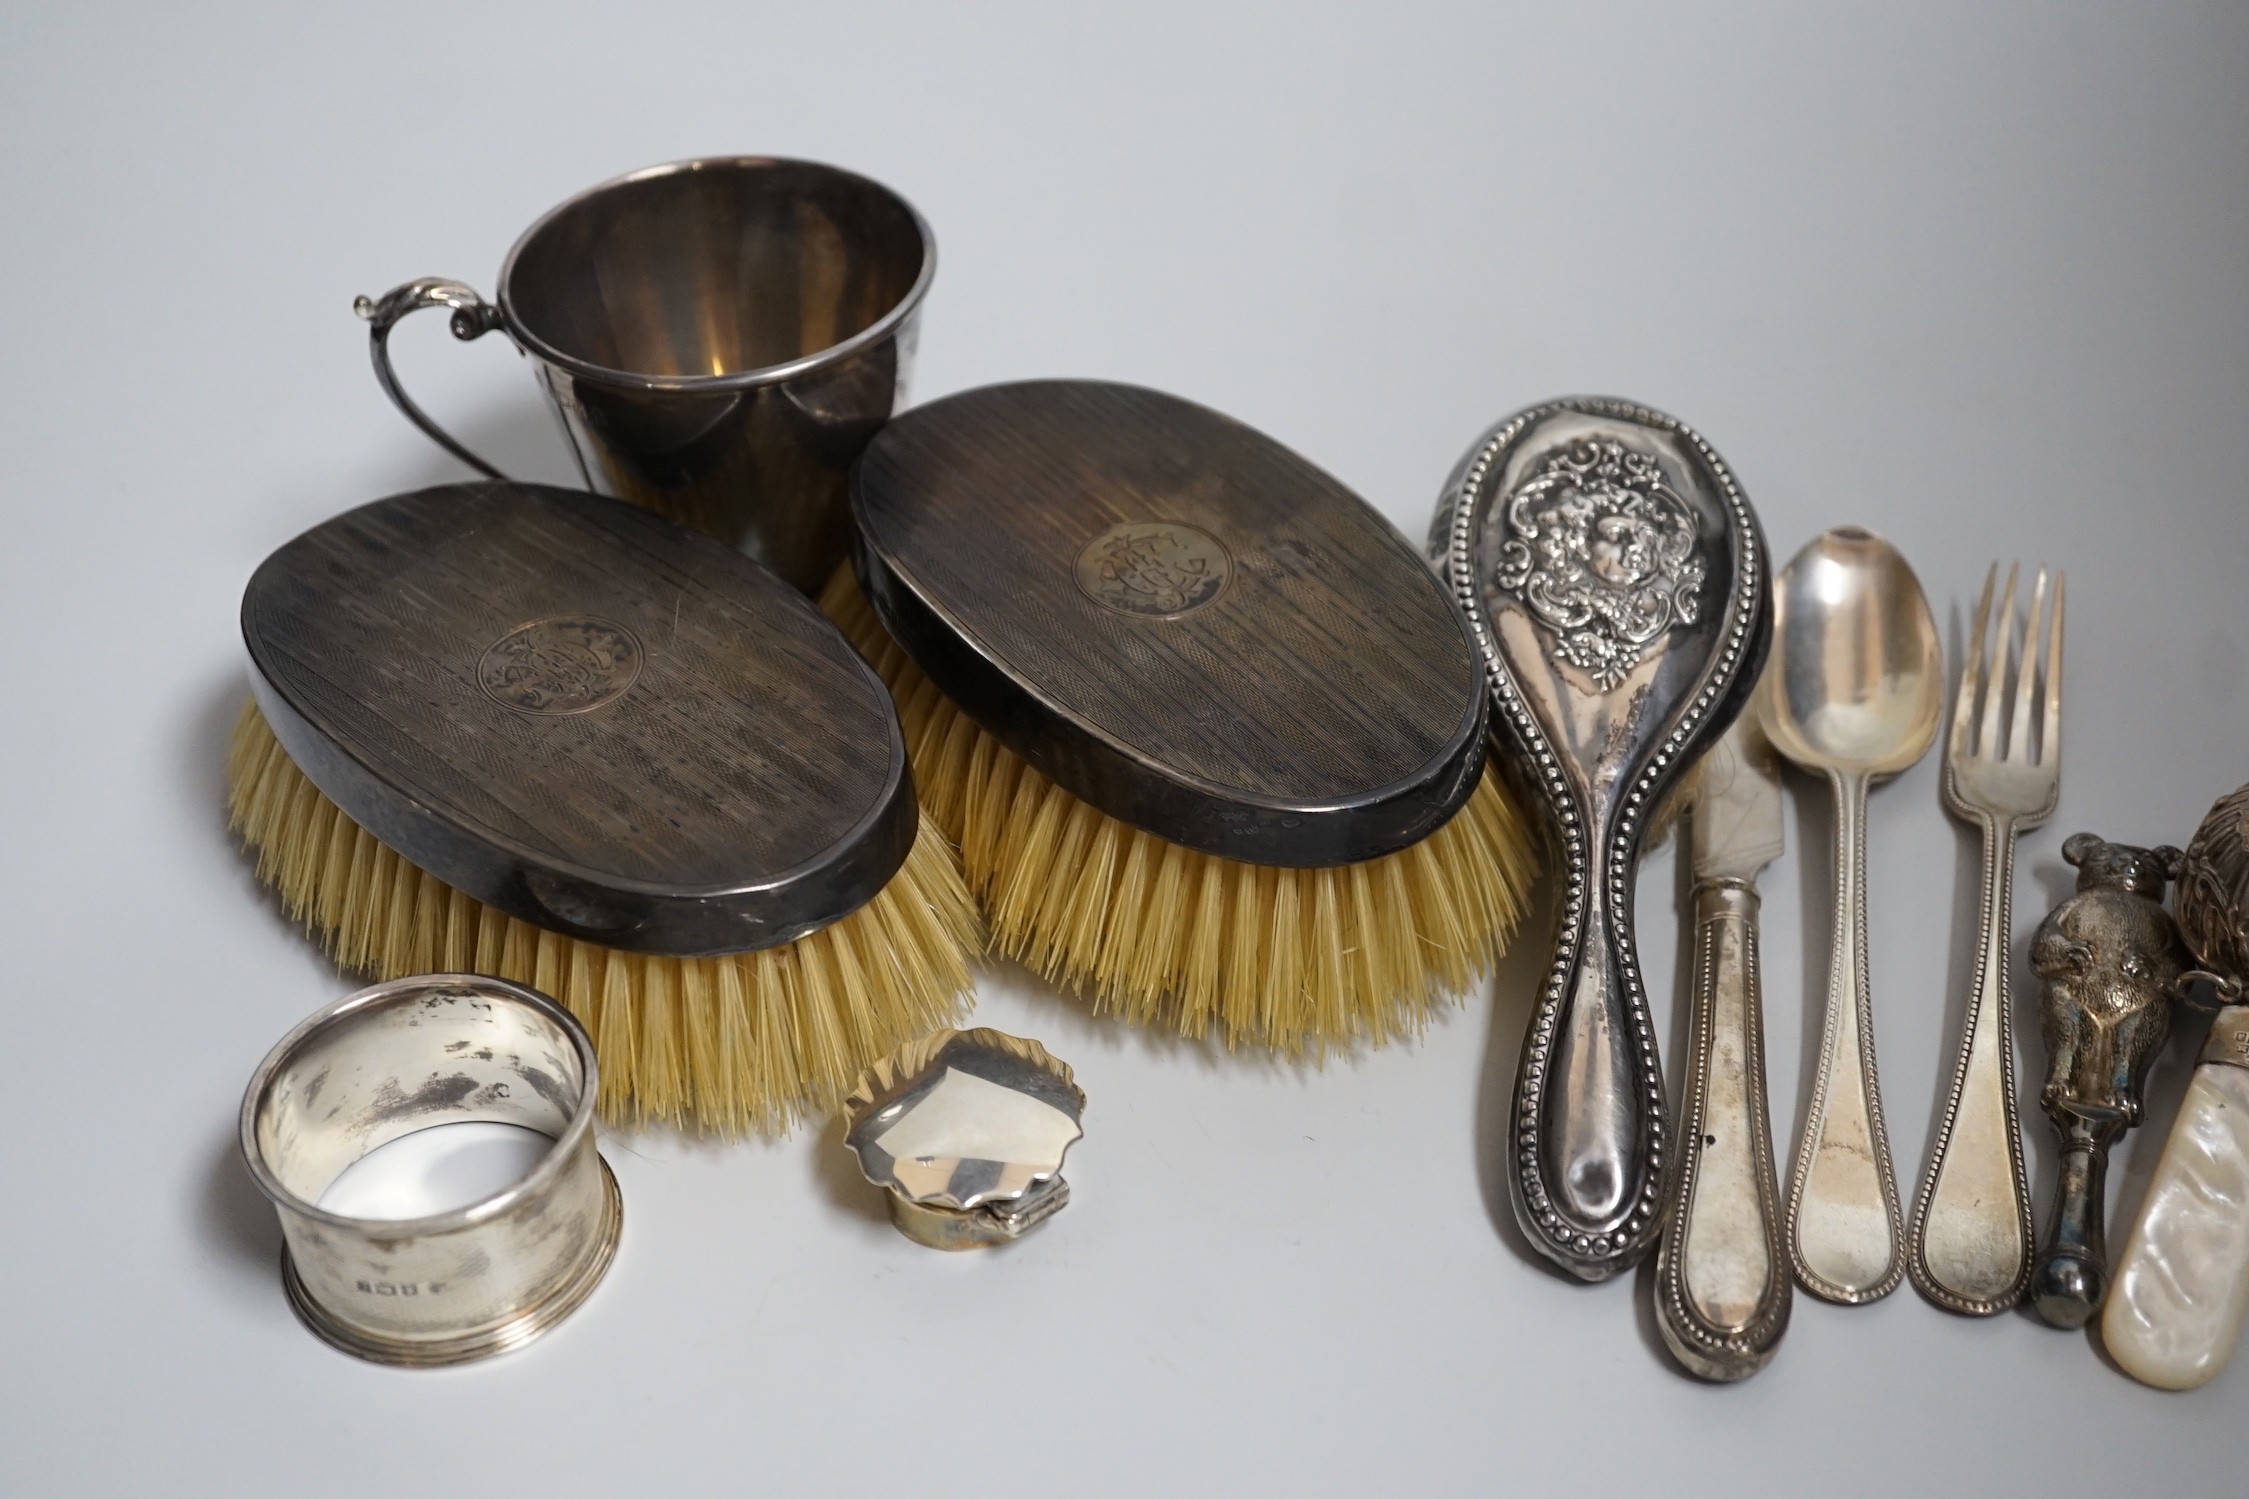 A mixed group of silverware including a pair of silver mounted clothes brushes, two rattles, a napkin ring, a christening trio and mug.